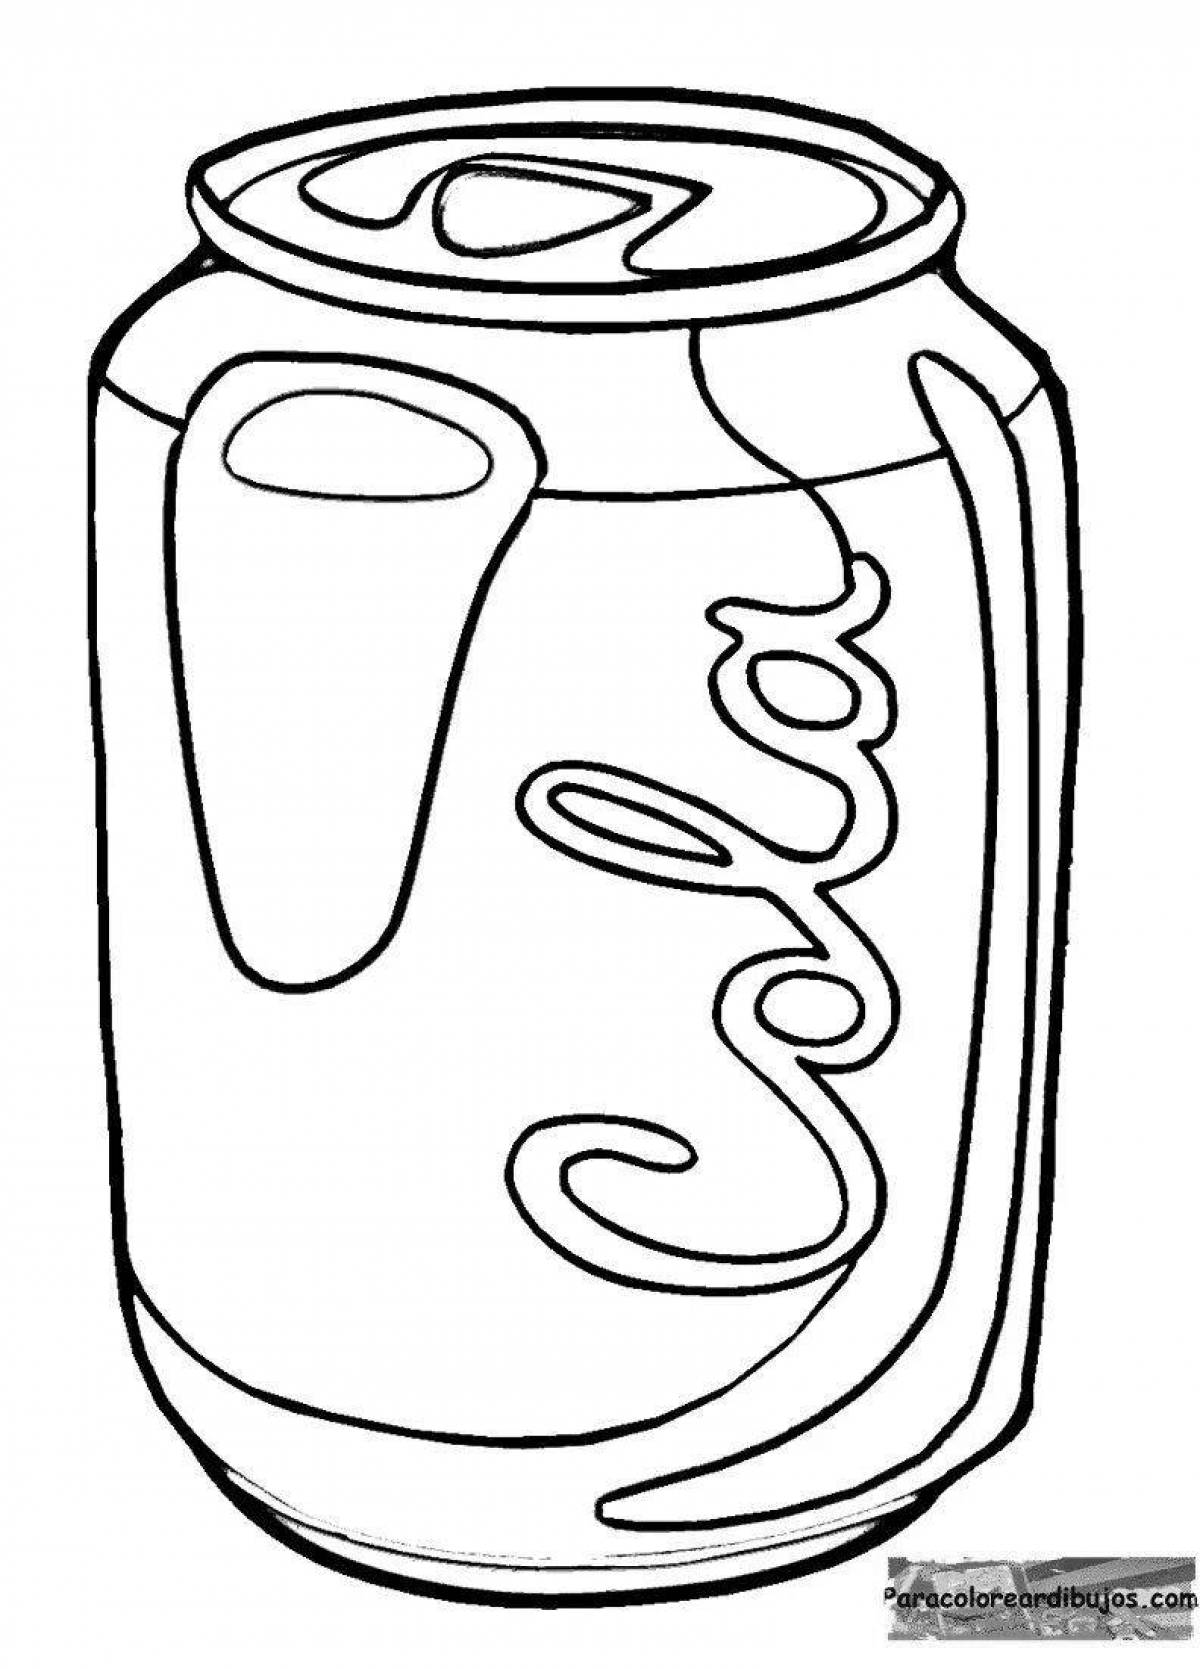 Sweet coke can coloring